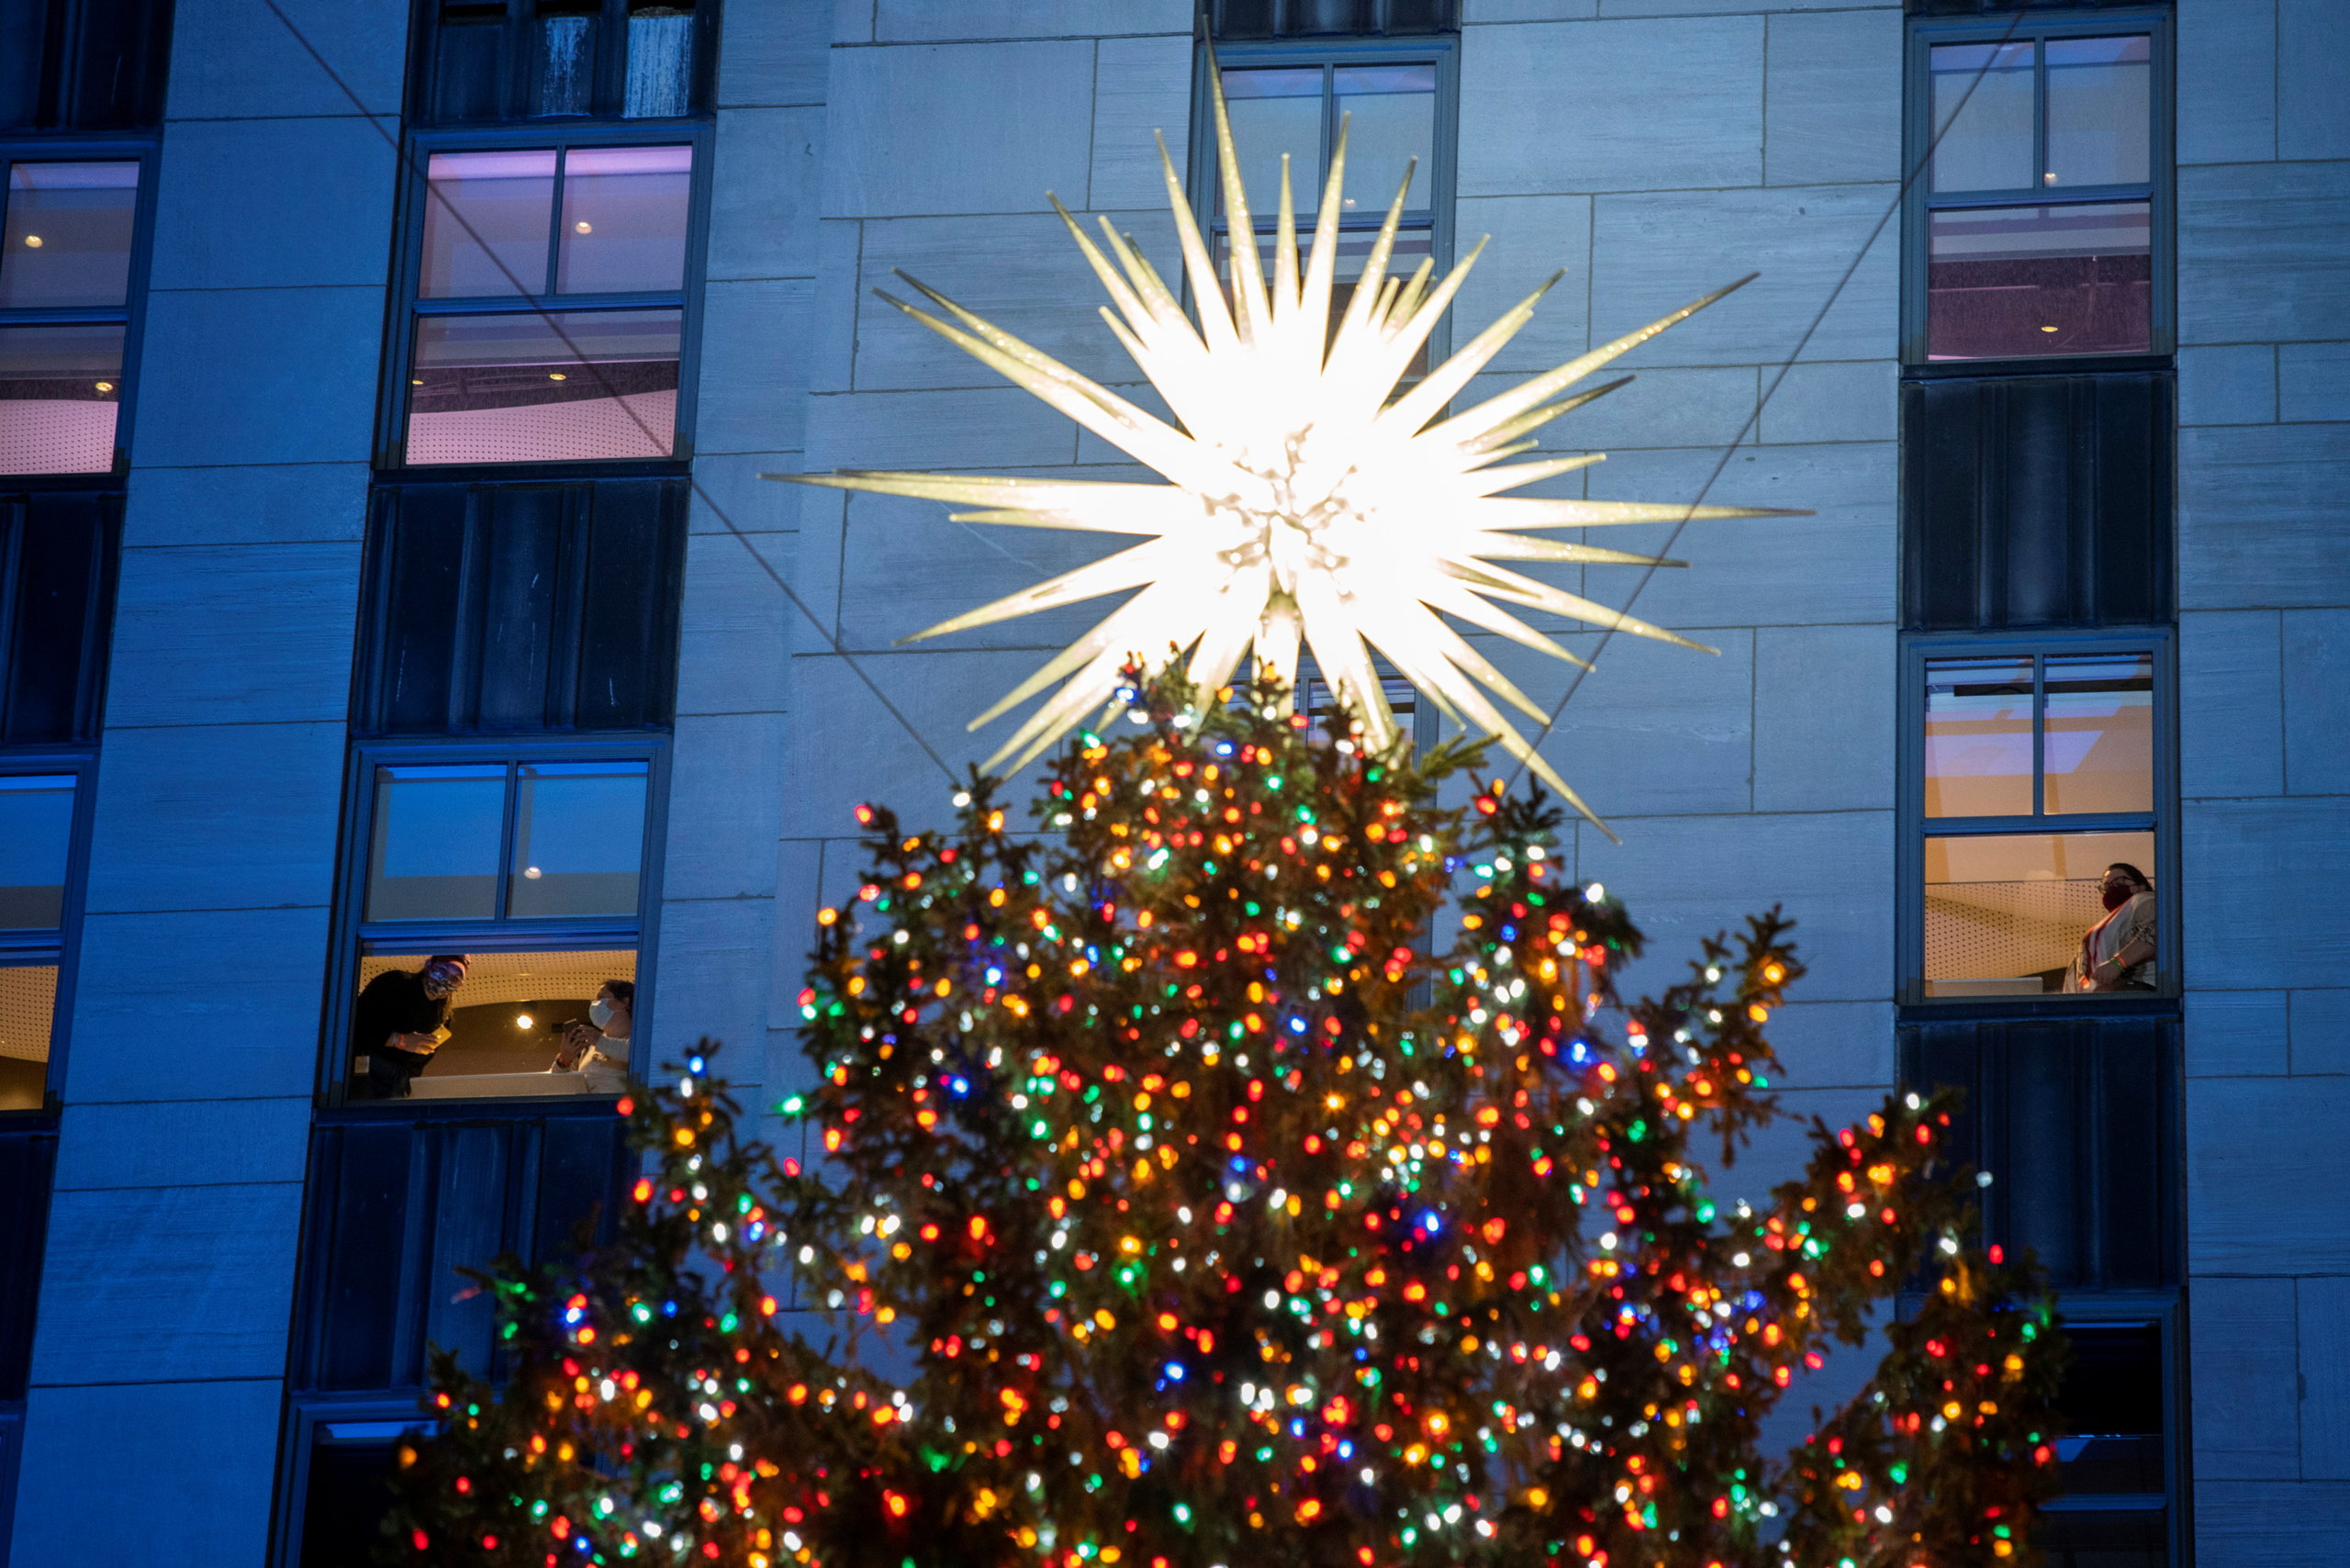 New York bypassed: Rockefeller Center Christmas tree is coming from Maryland